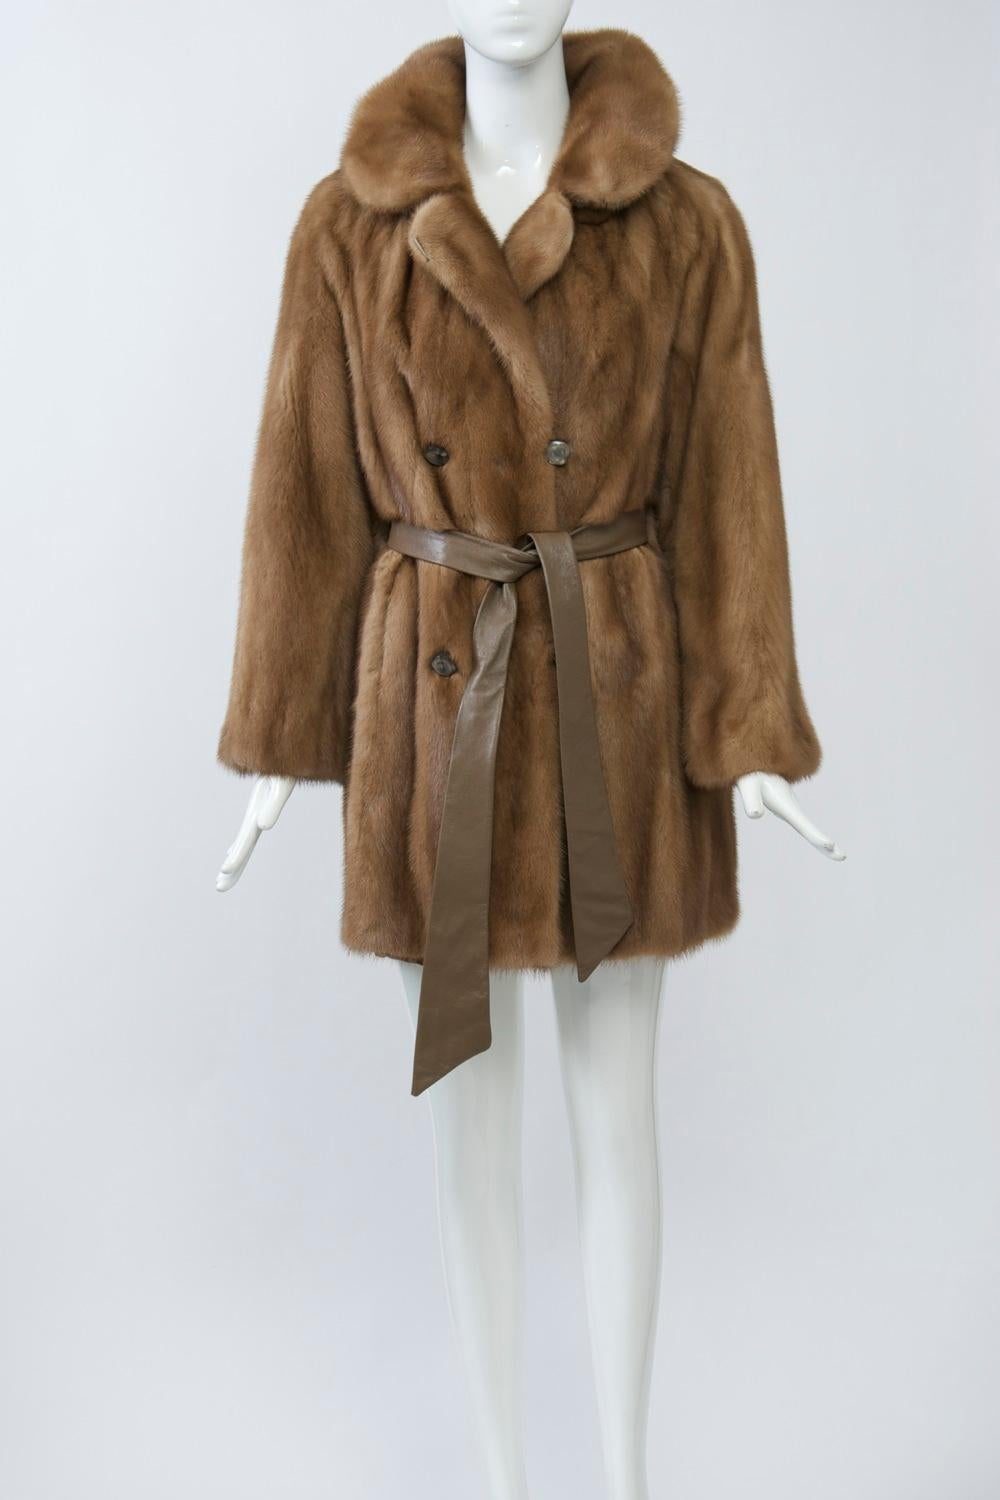 Golden mink jacket, c.1970s, featuring double-breasted styling and a leather sash belt that passes through the side seams to tie in front and leave the back loose (can also be sashed around the entire waist). The collar can be buttoned up for